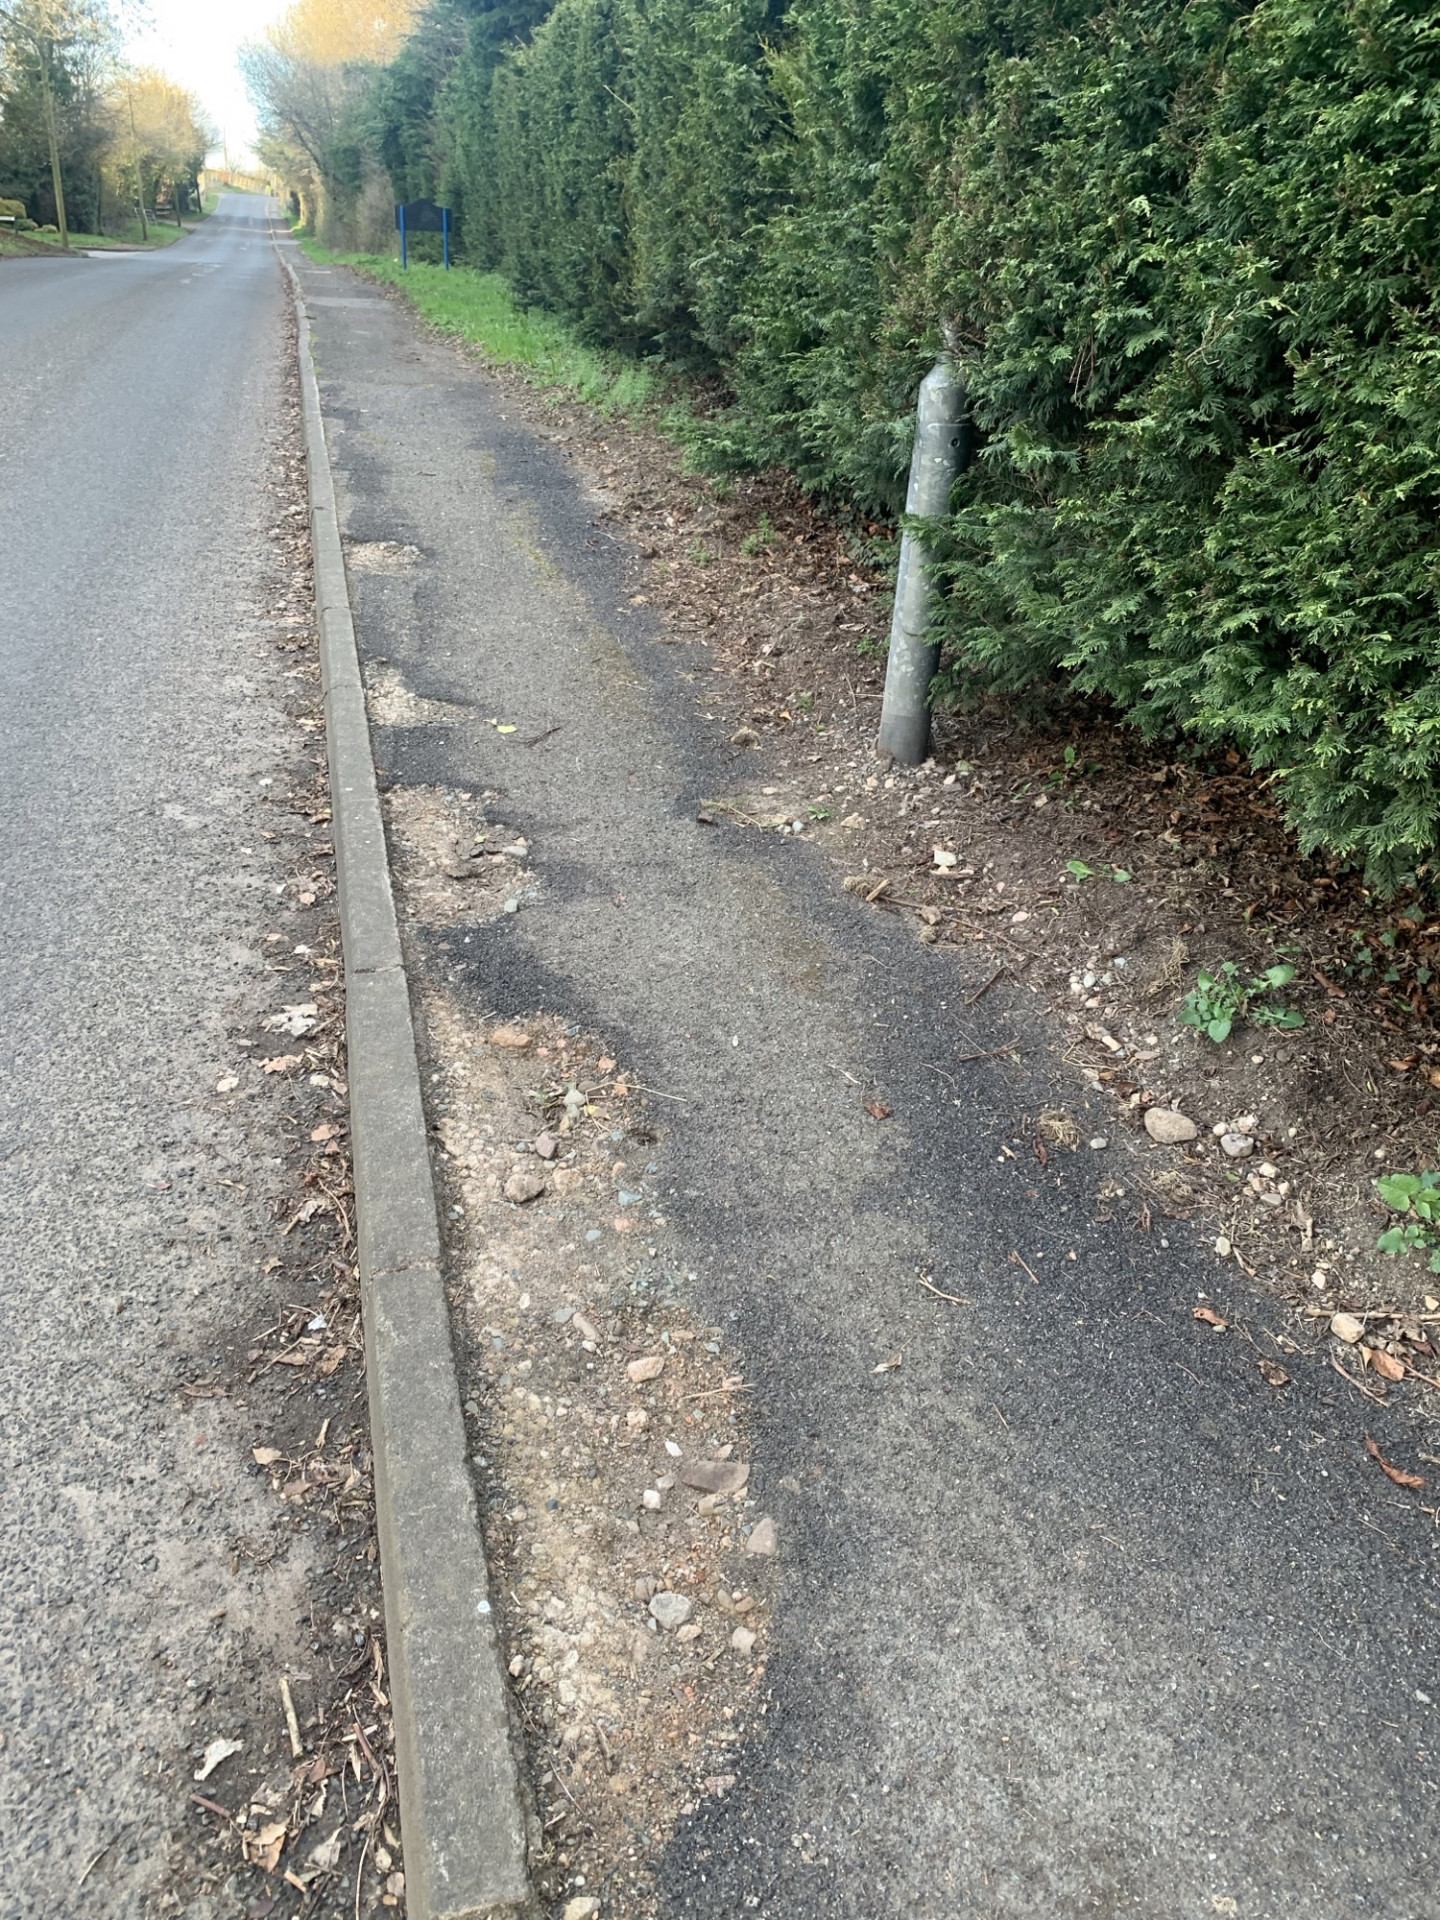 Concerns raised over crumbling footpaths in south Tyrone villages